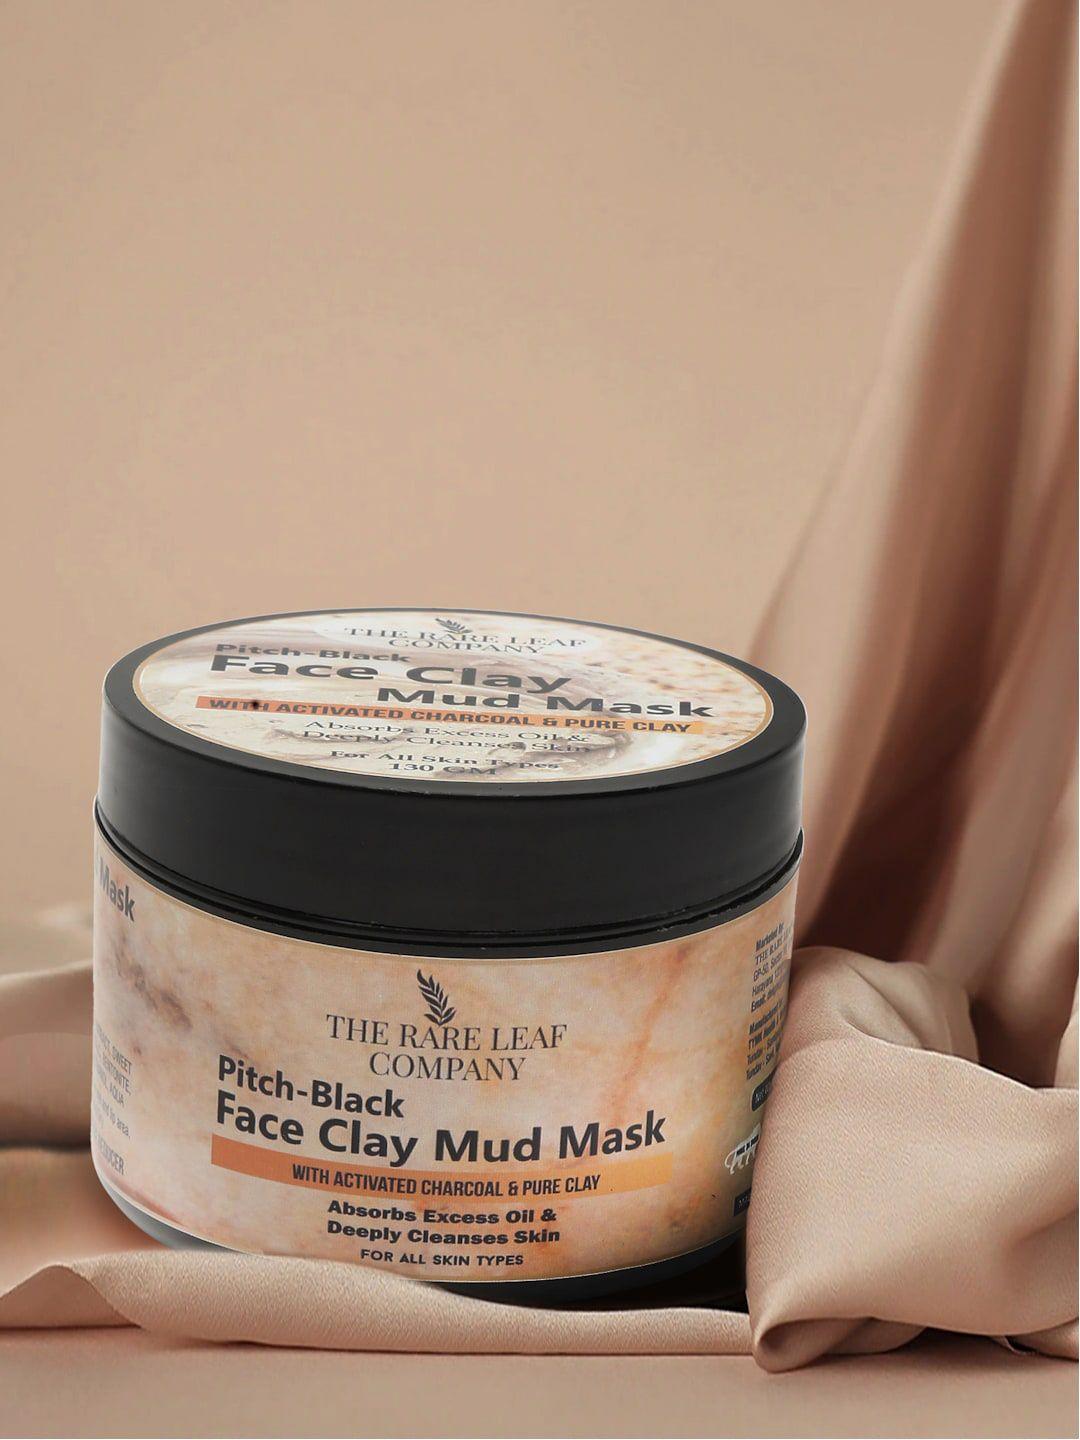 the rare leaf company pitch black face clay-mud mask with activated charcoal & clay 130 g